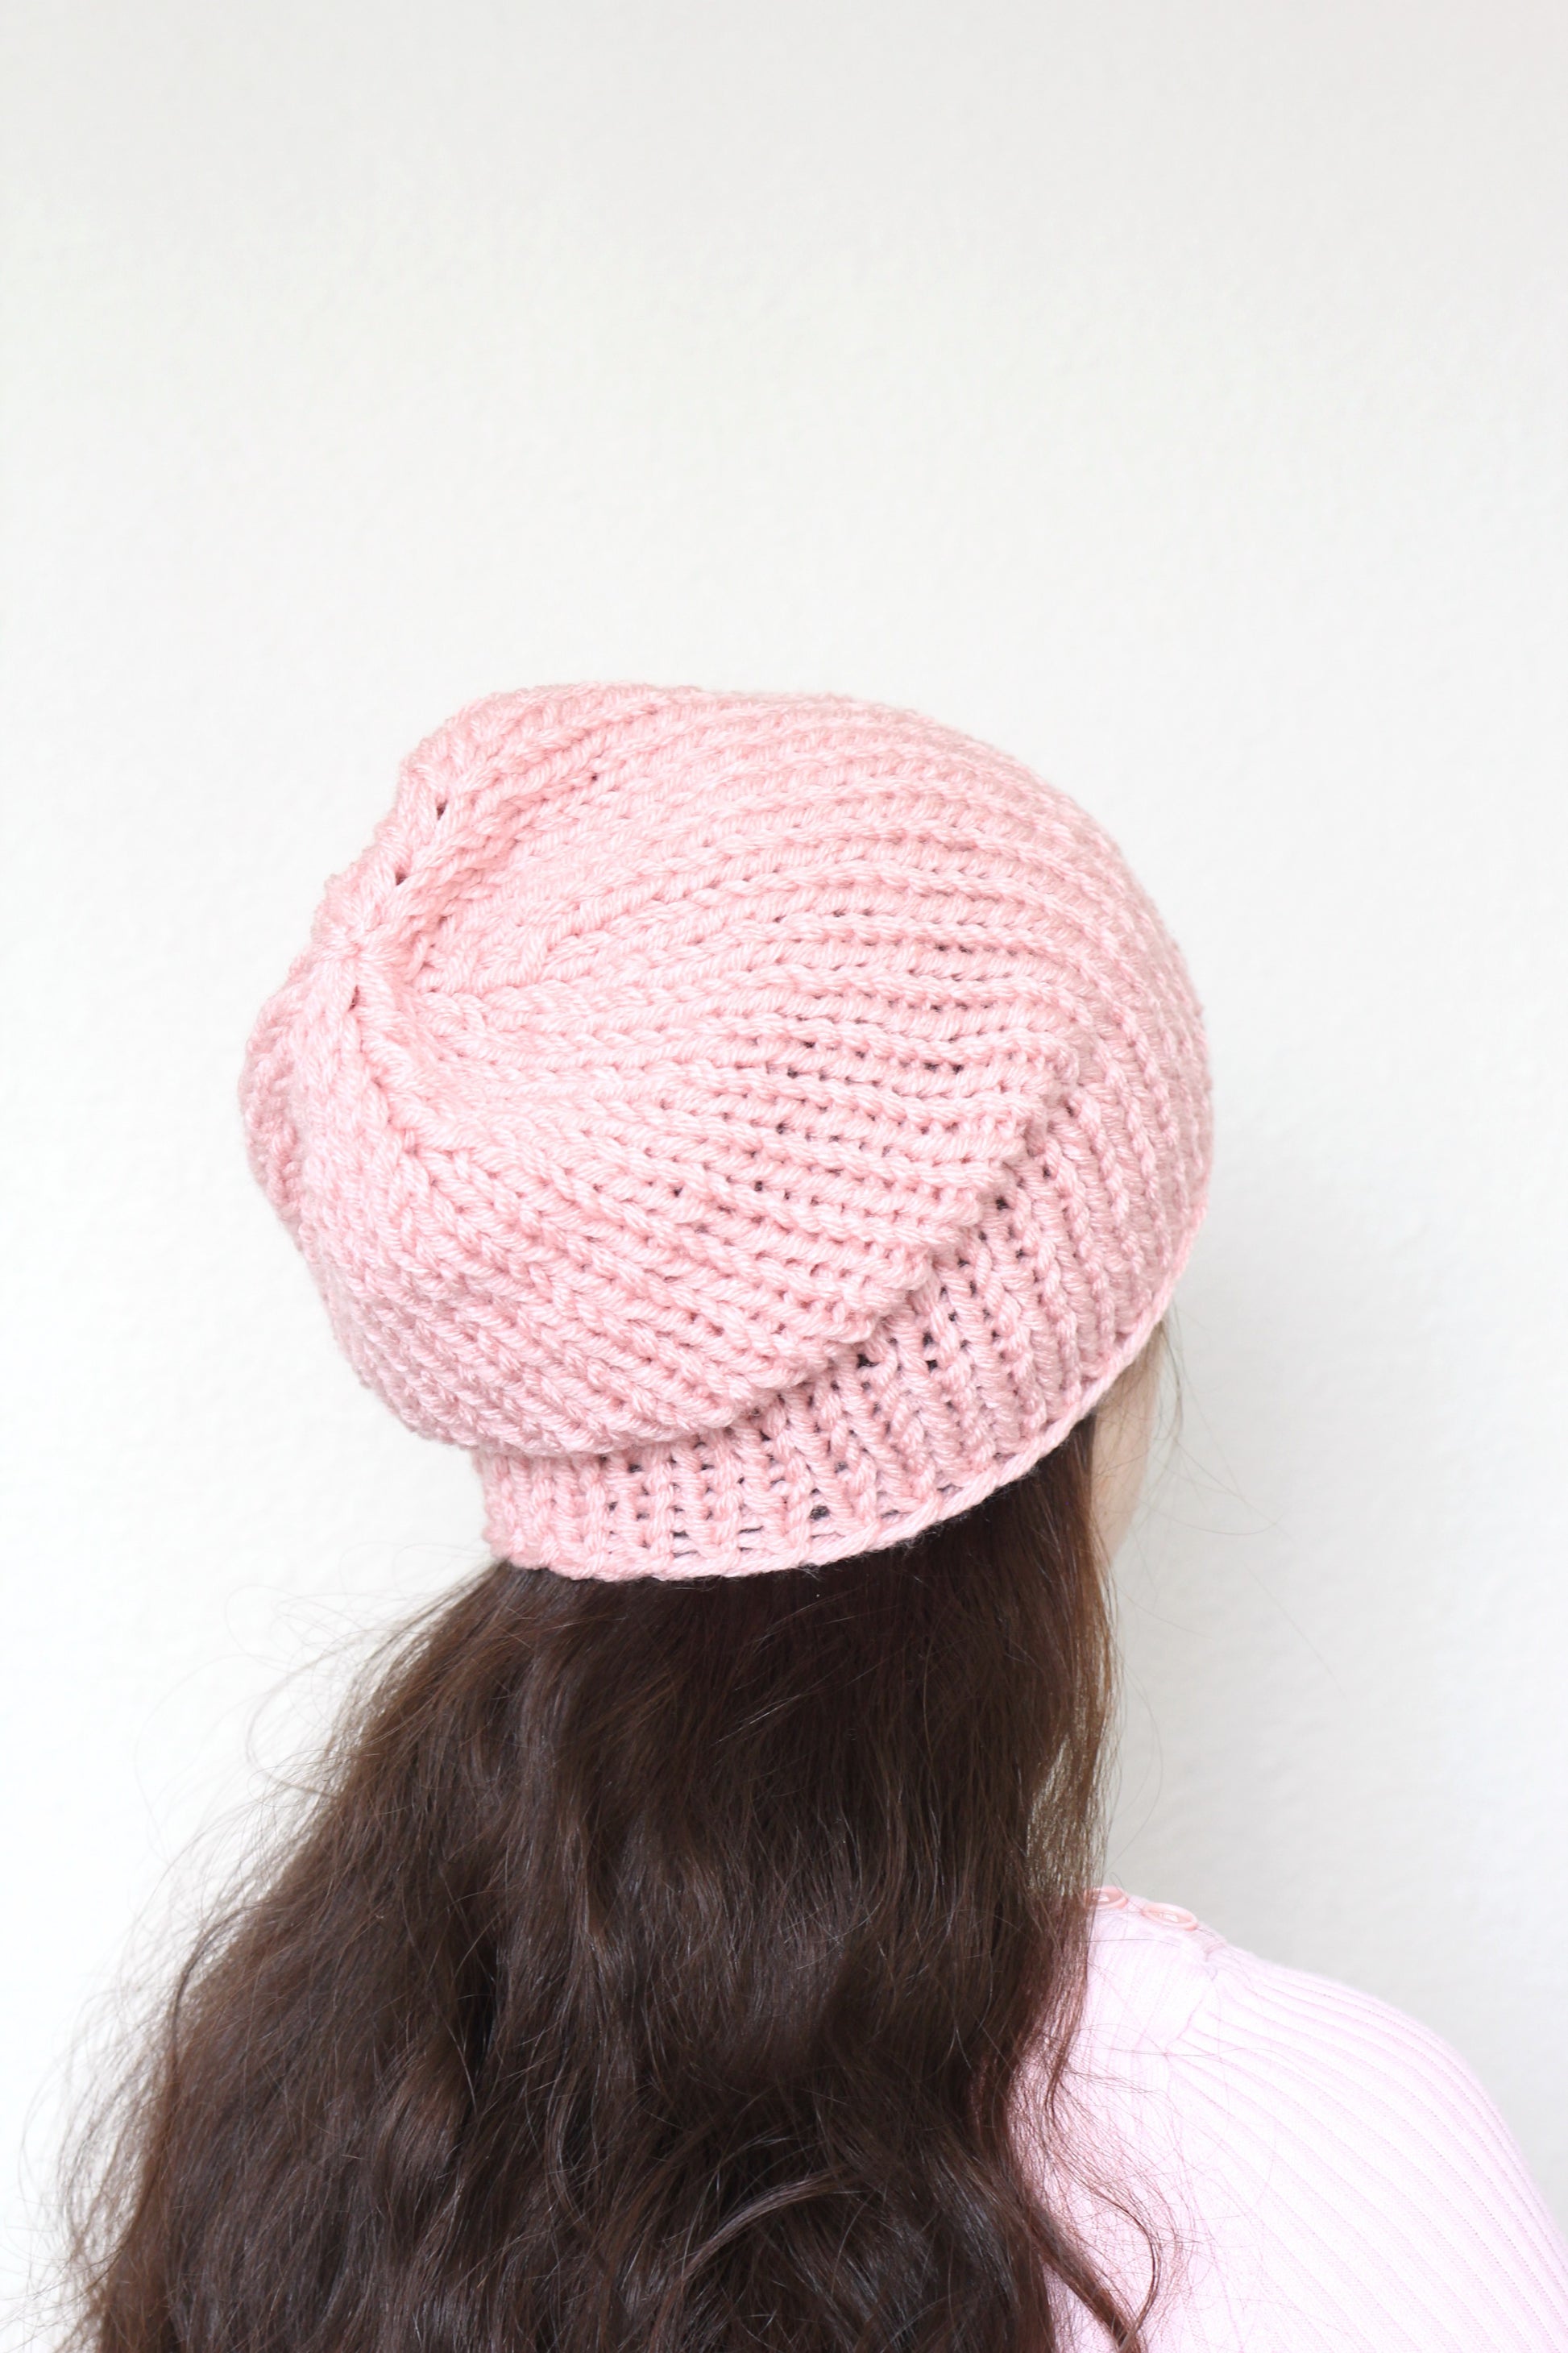 Beanie hat, knit hat, slouchy hat, knit beanie in hot pink color